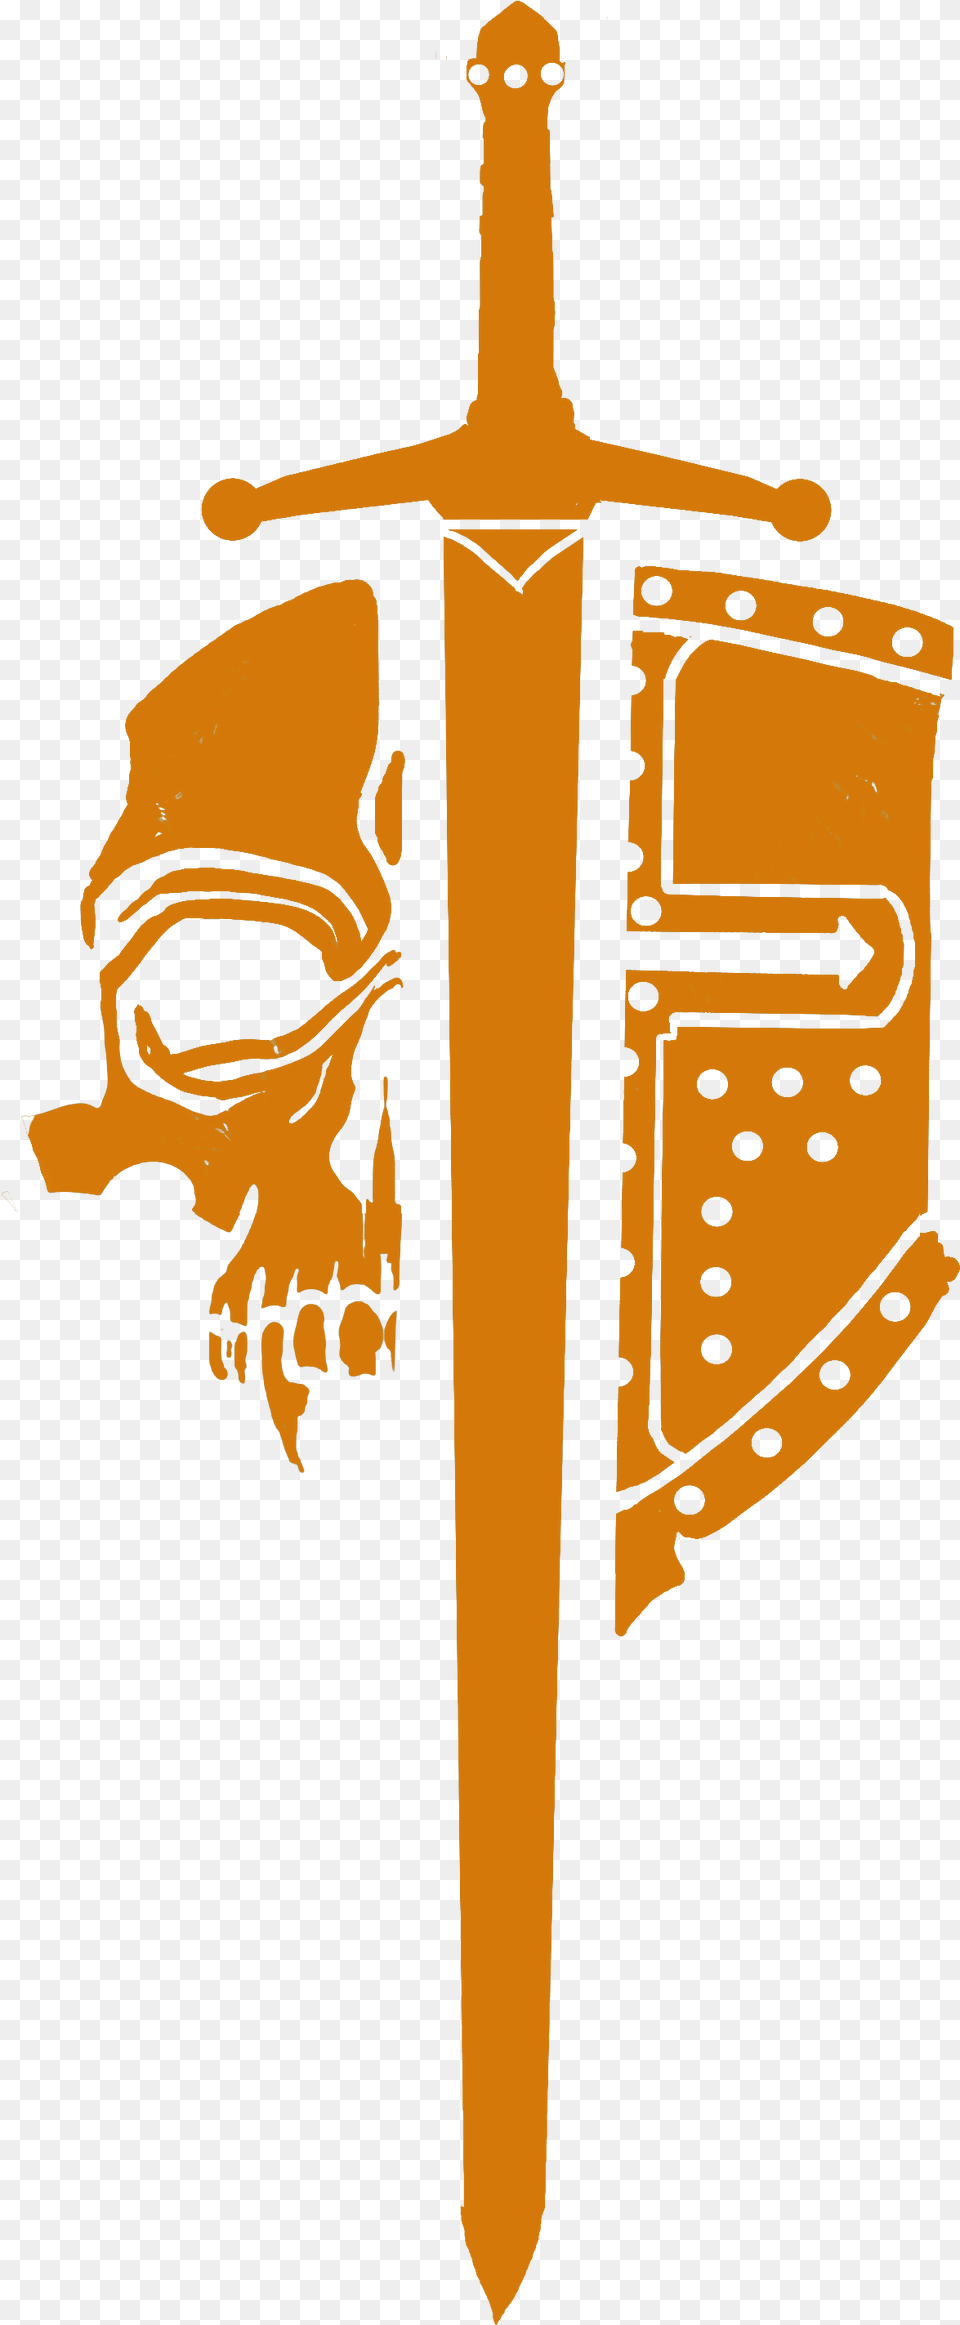 Knight Symbol For Honor Knight For Honor Symbol, Weapon, Sword, Cross, Face Free Transparent Png